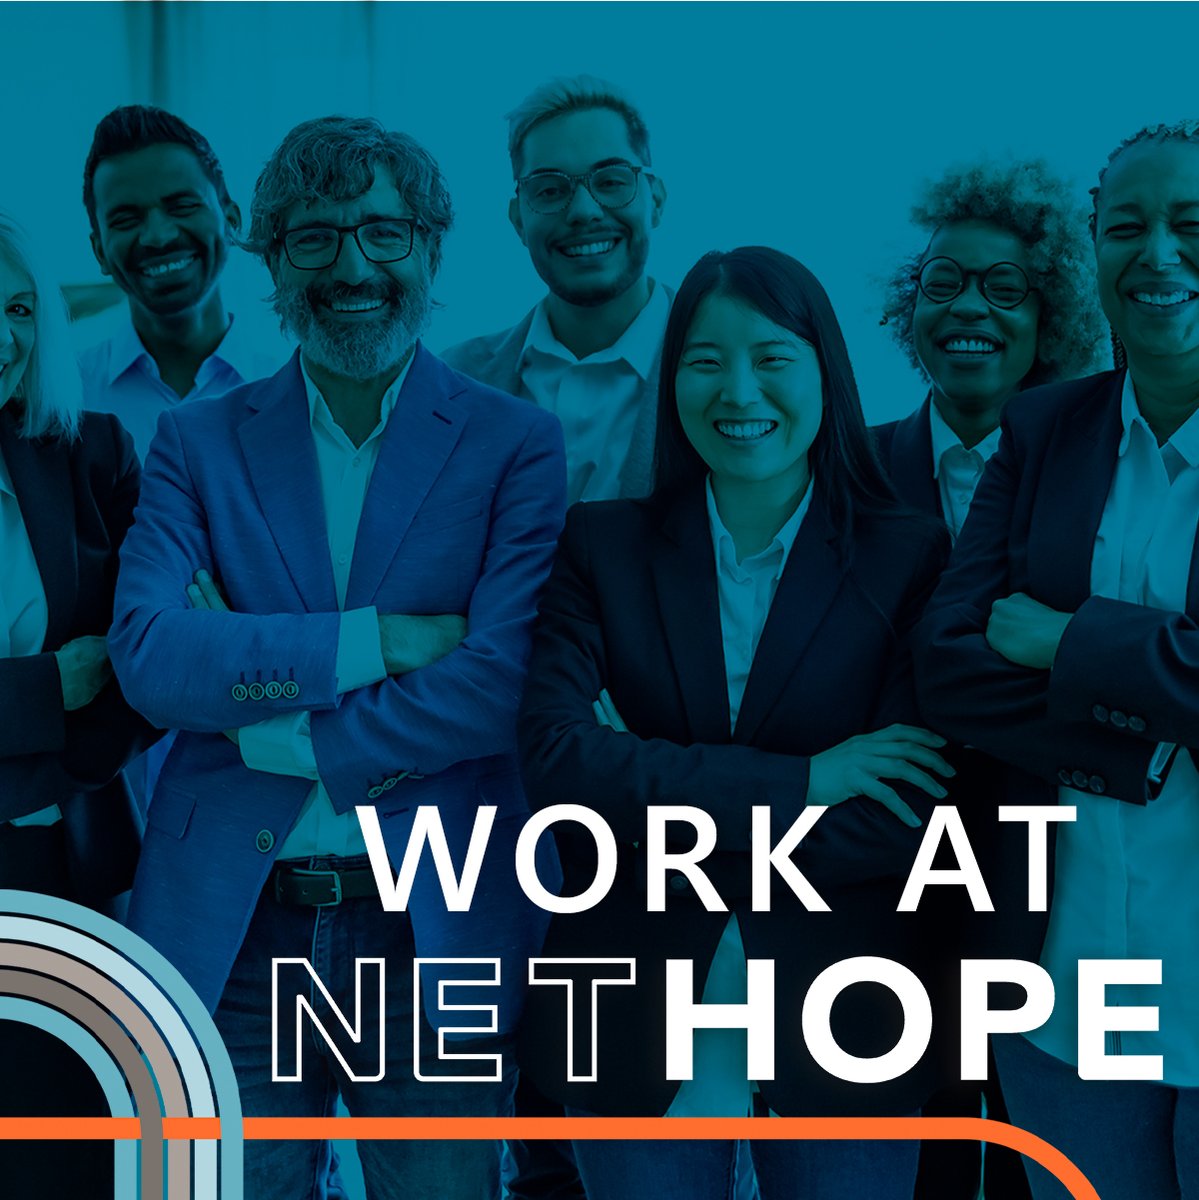 Hello, NetHope Community! We're #hiring a Marketing Consultant or Marketing Agency. Visit our Careers page for the full job description, relevant details, and important links: nethope.org/homepage/caree…